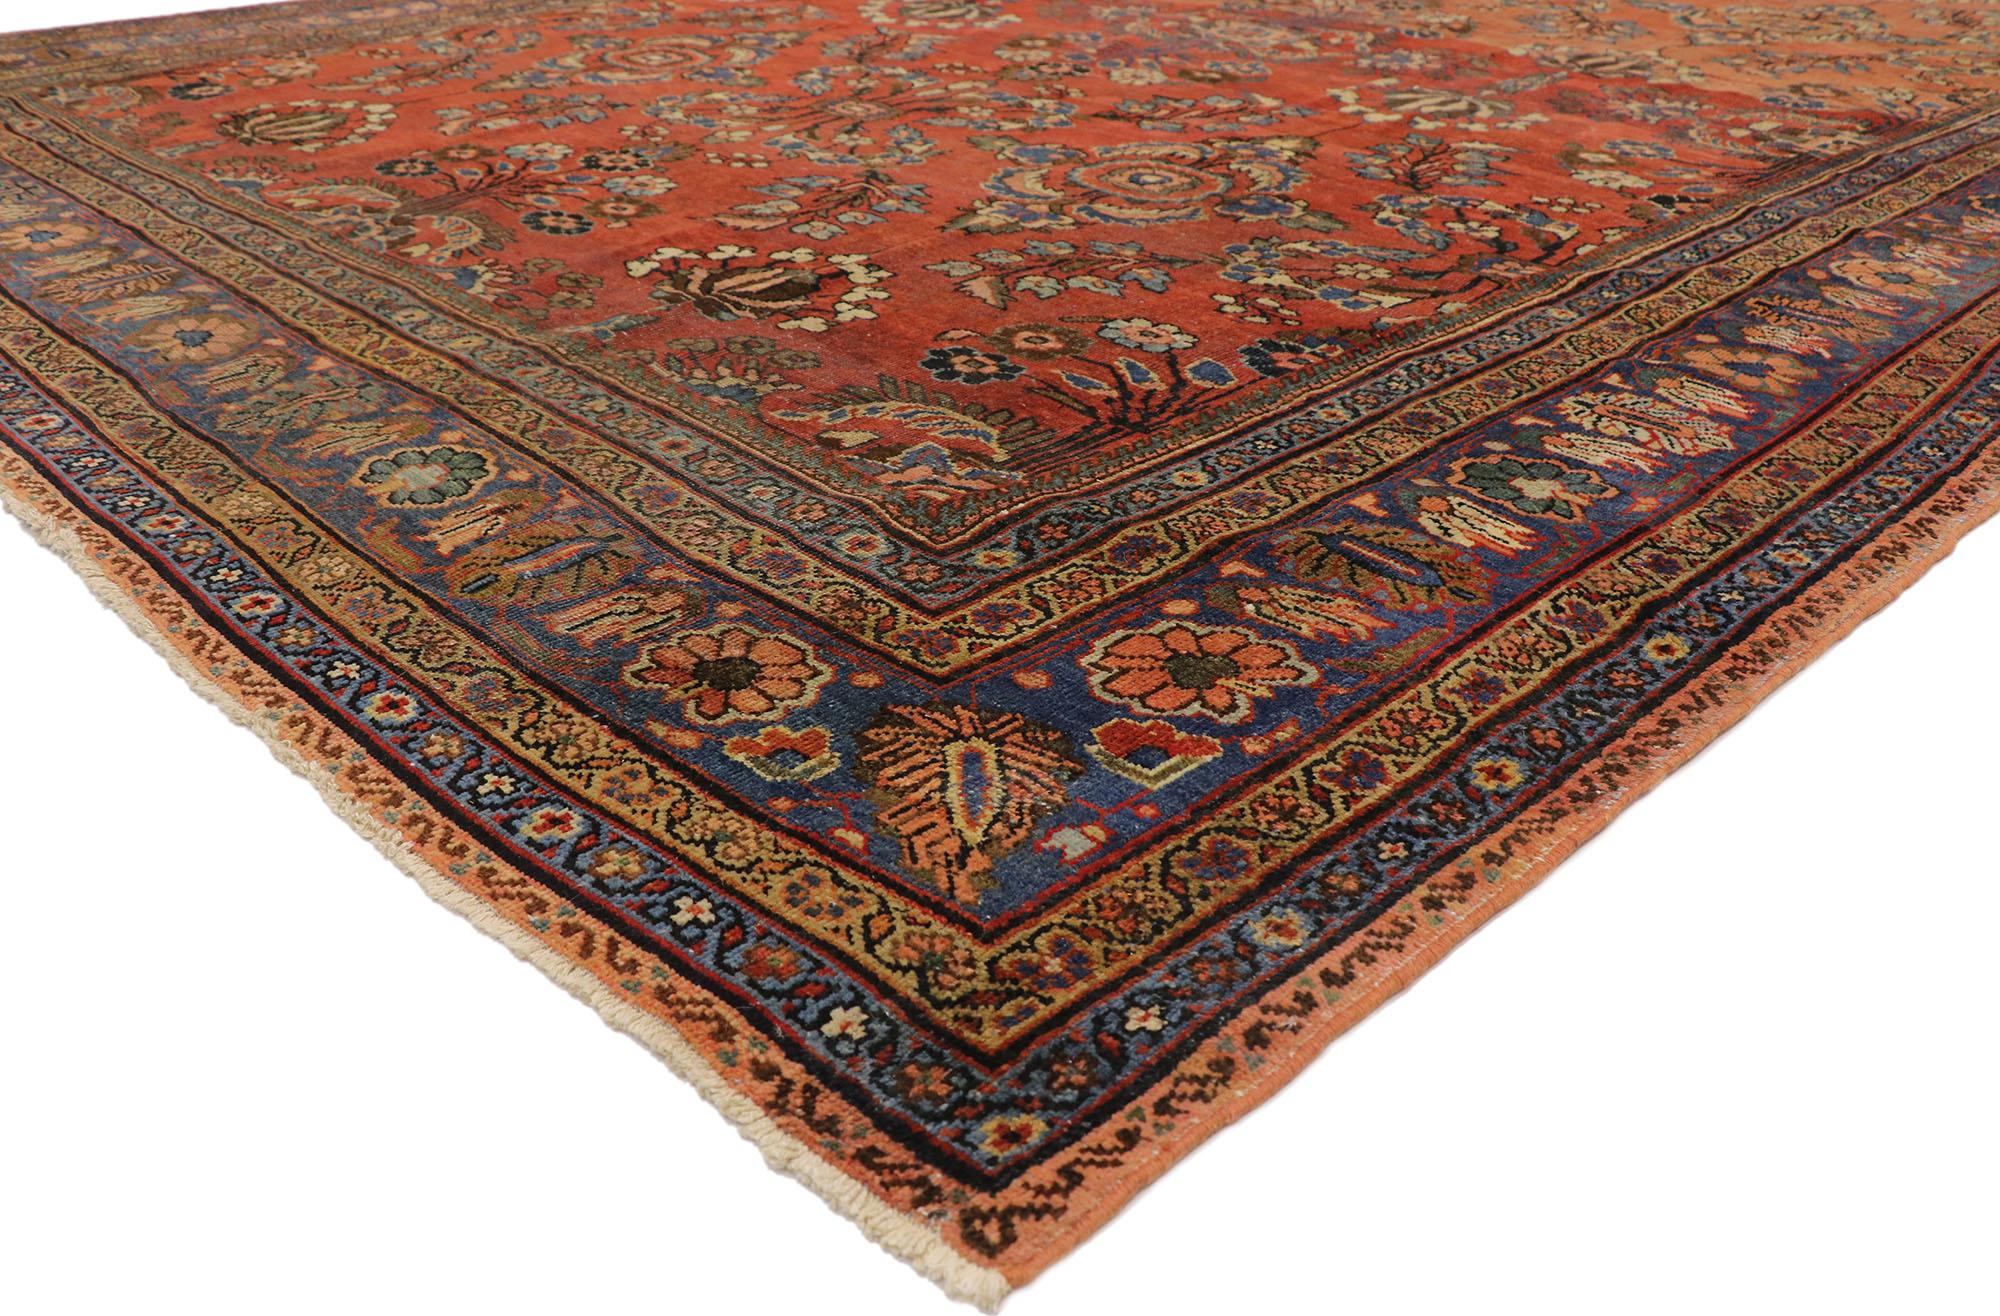 73381 Antique Mahal Persian Palace Size Rug with Manor House Tudor Style. With its incredible level of detail and impressive all-over geometric pattern, this magnificent and beautifully woven antique Persian Mahal is full of character and stately